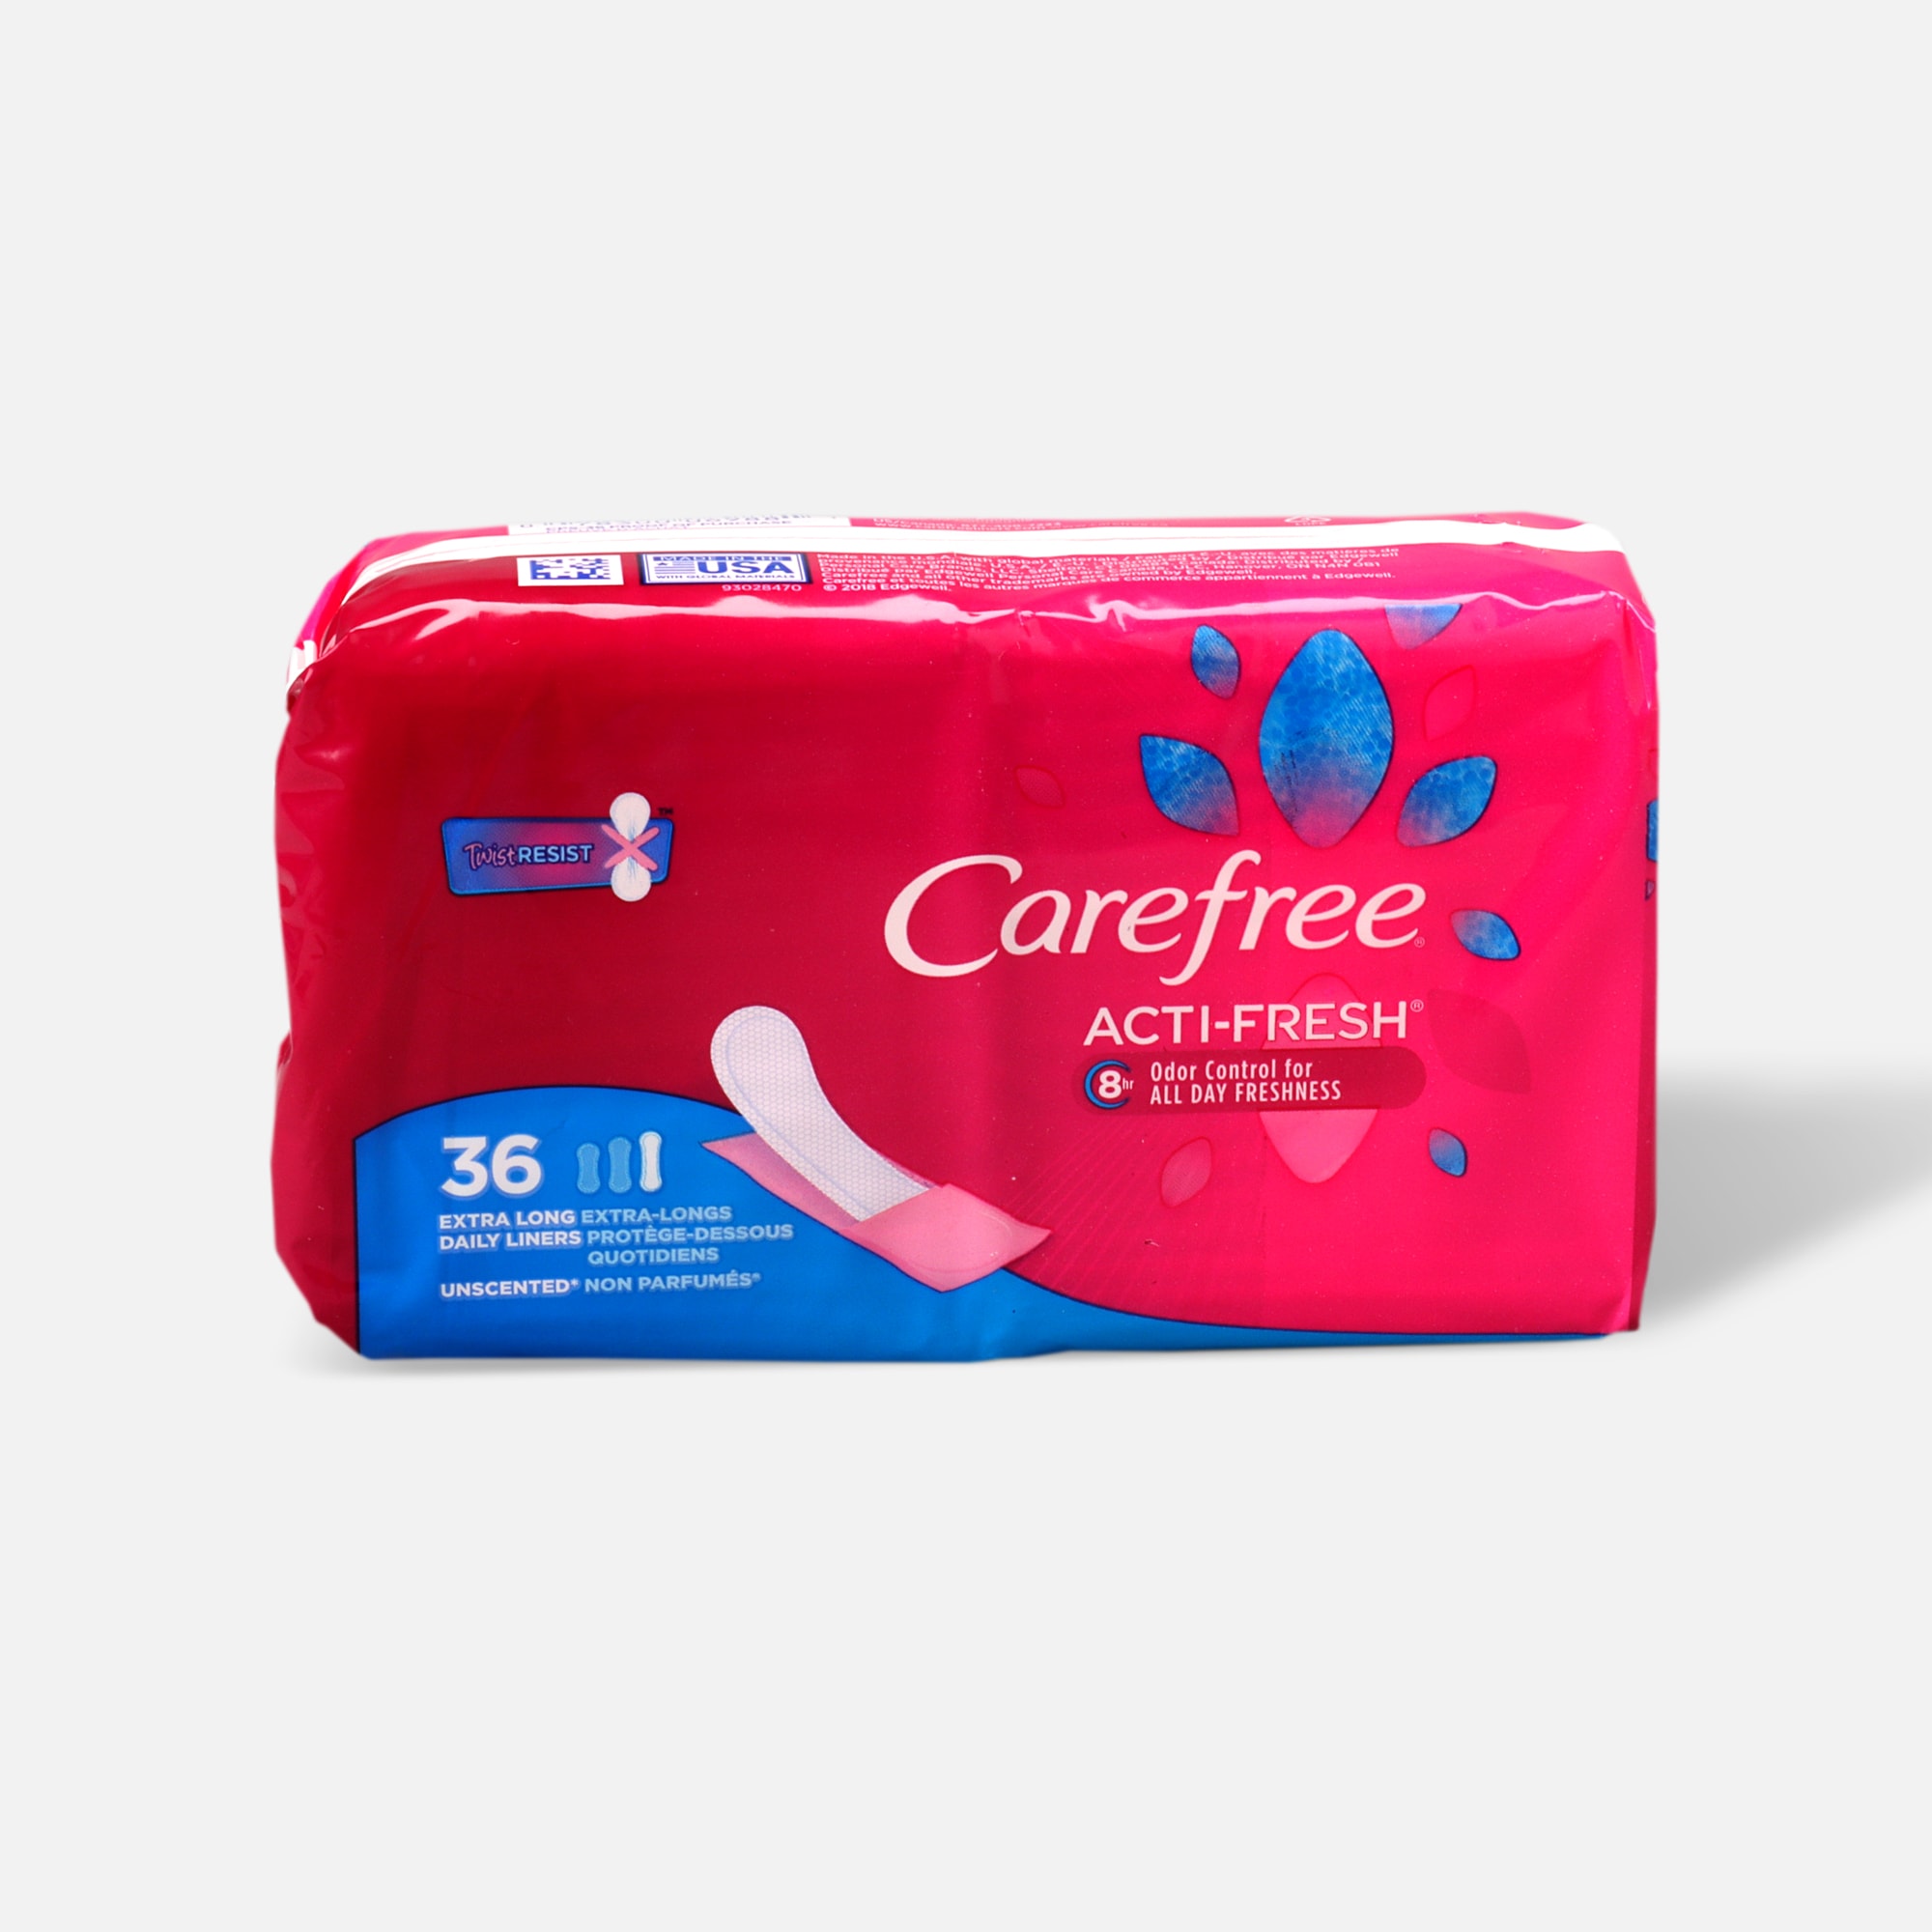 Carefree Criticized for Panty Liner Ad 